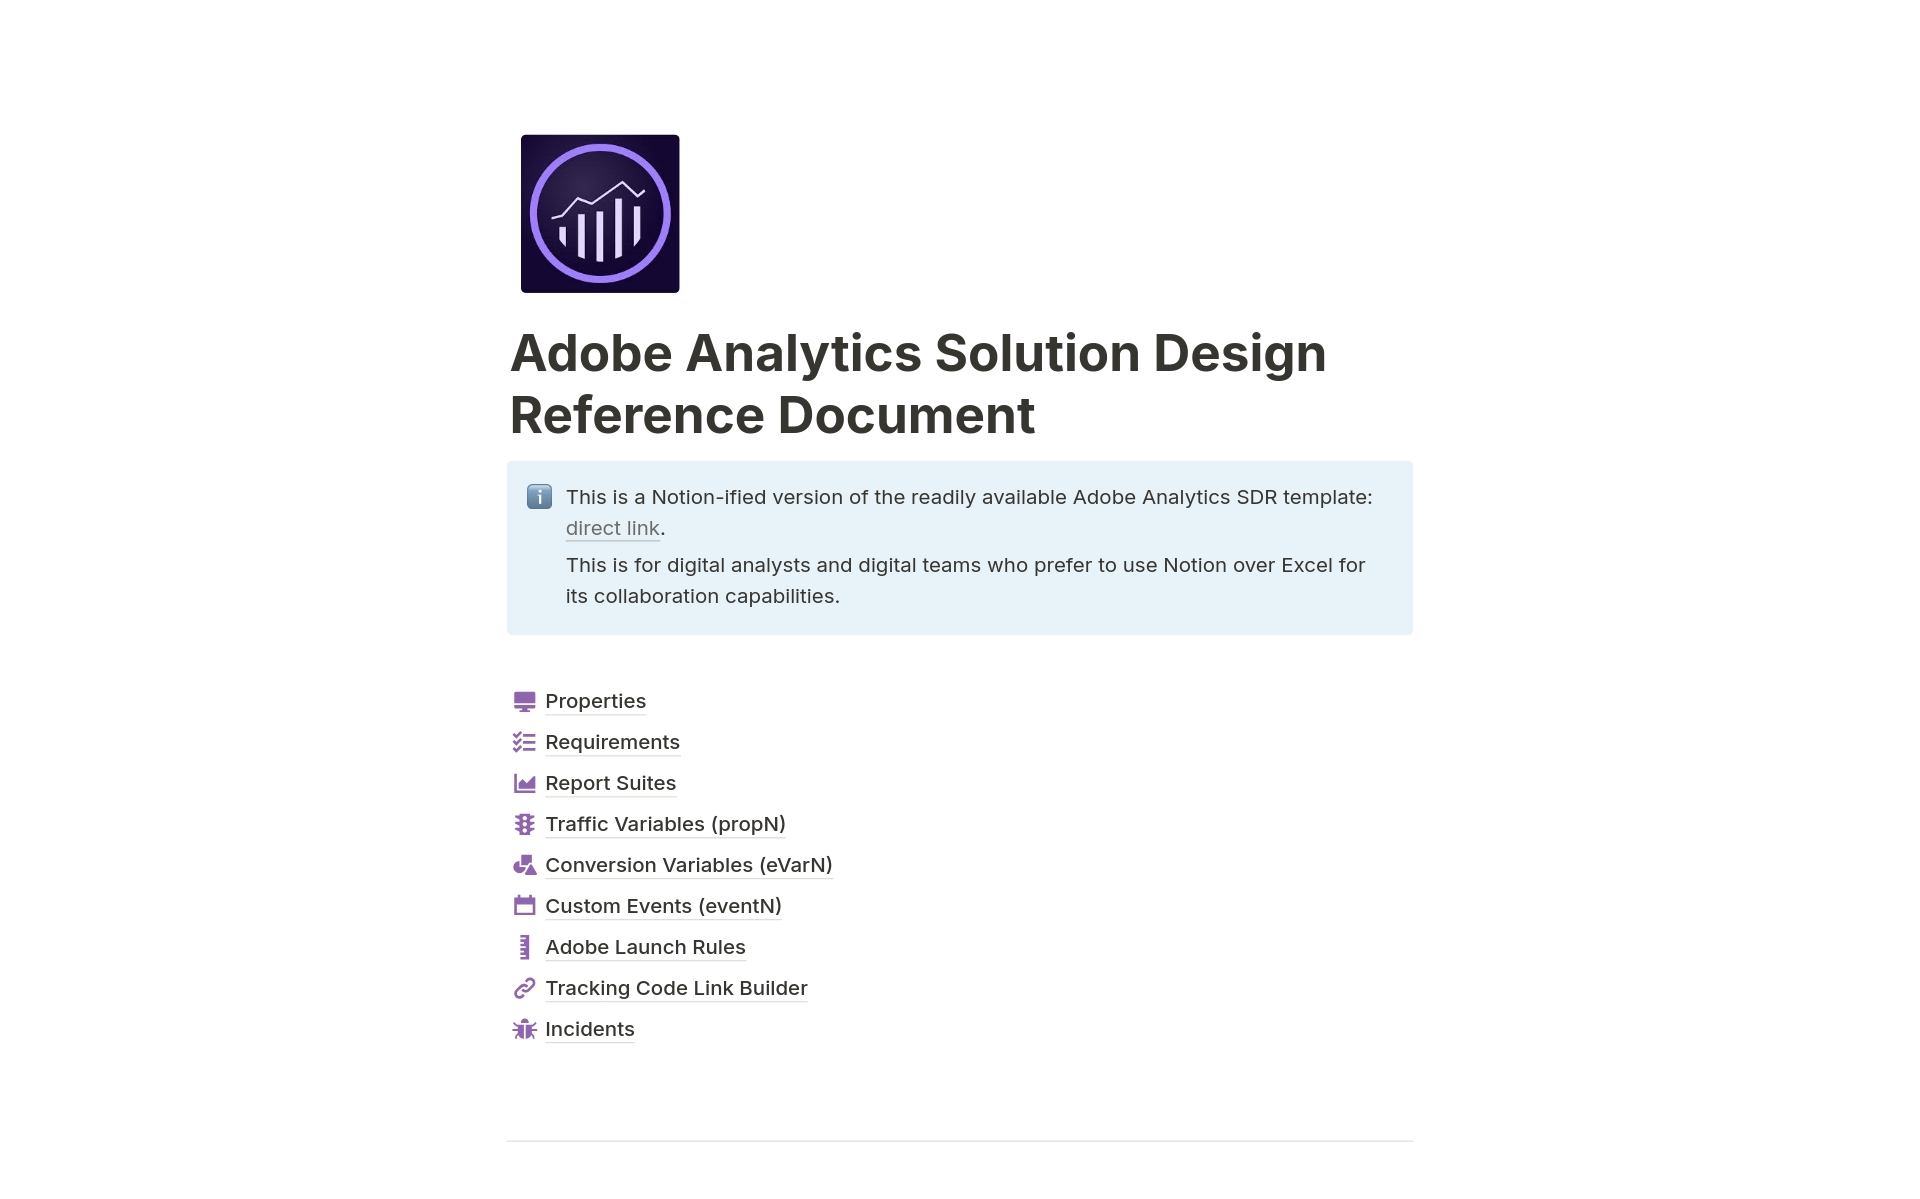 This is a Notion-ified version of the readily available Adobe Analytics SDR template.